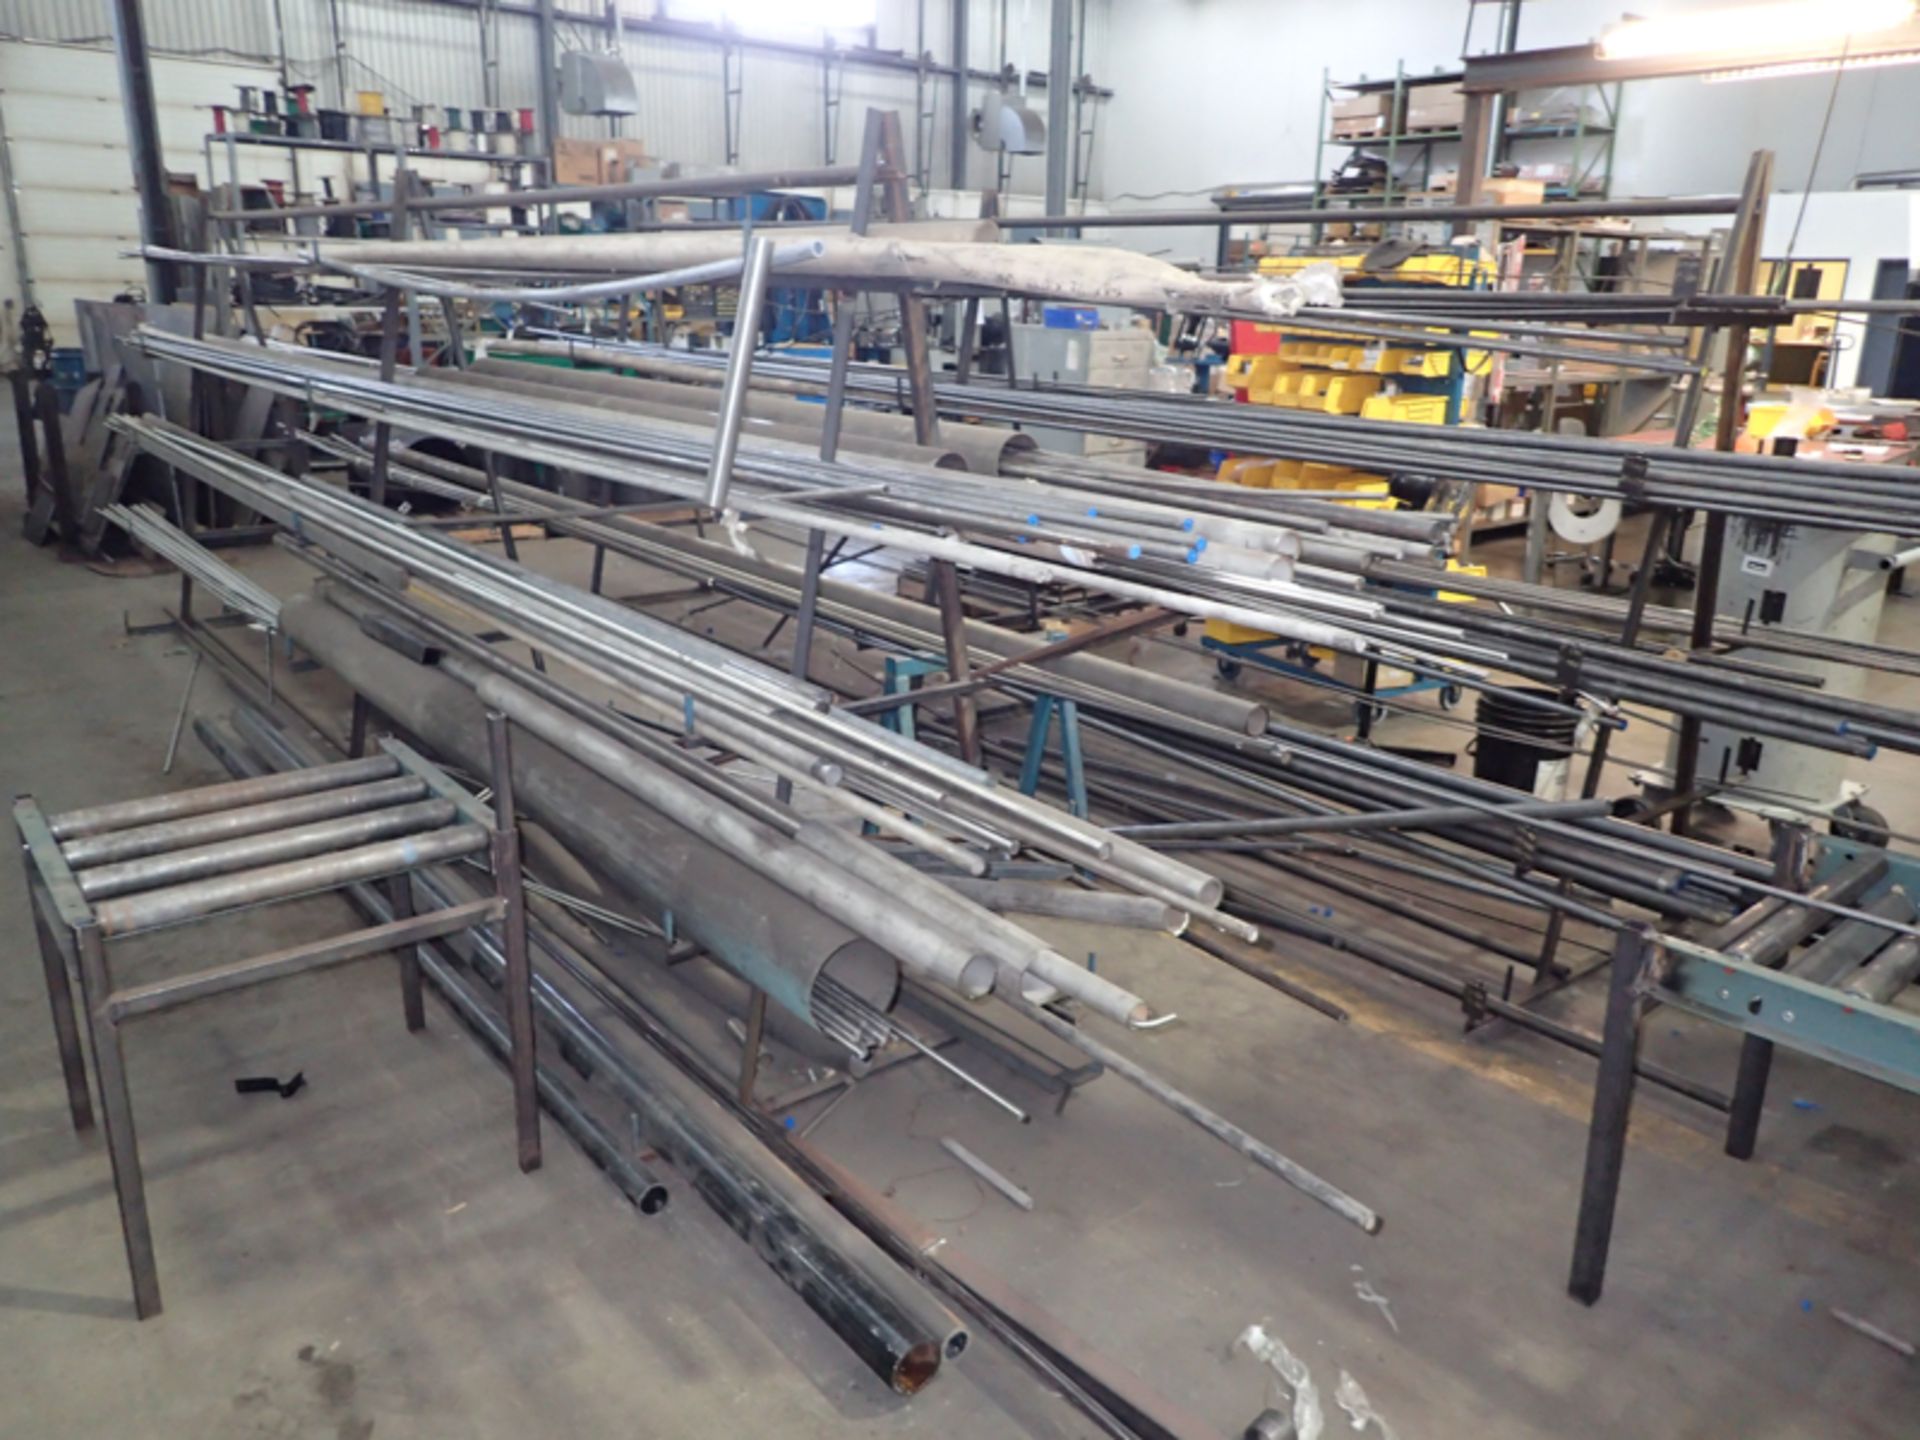 5 RACK OF ASSORTED RODS, BARS, PLATES, ANGLES, PIPES (STEEL, STAINLESS STEEL & ALUMINUM) - Image 2 of 7